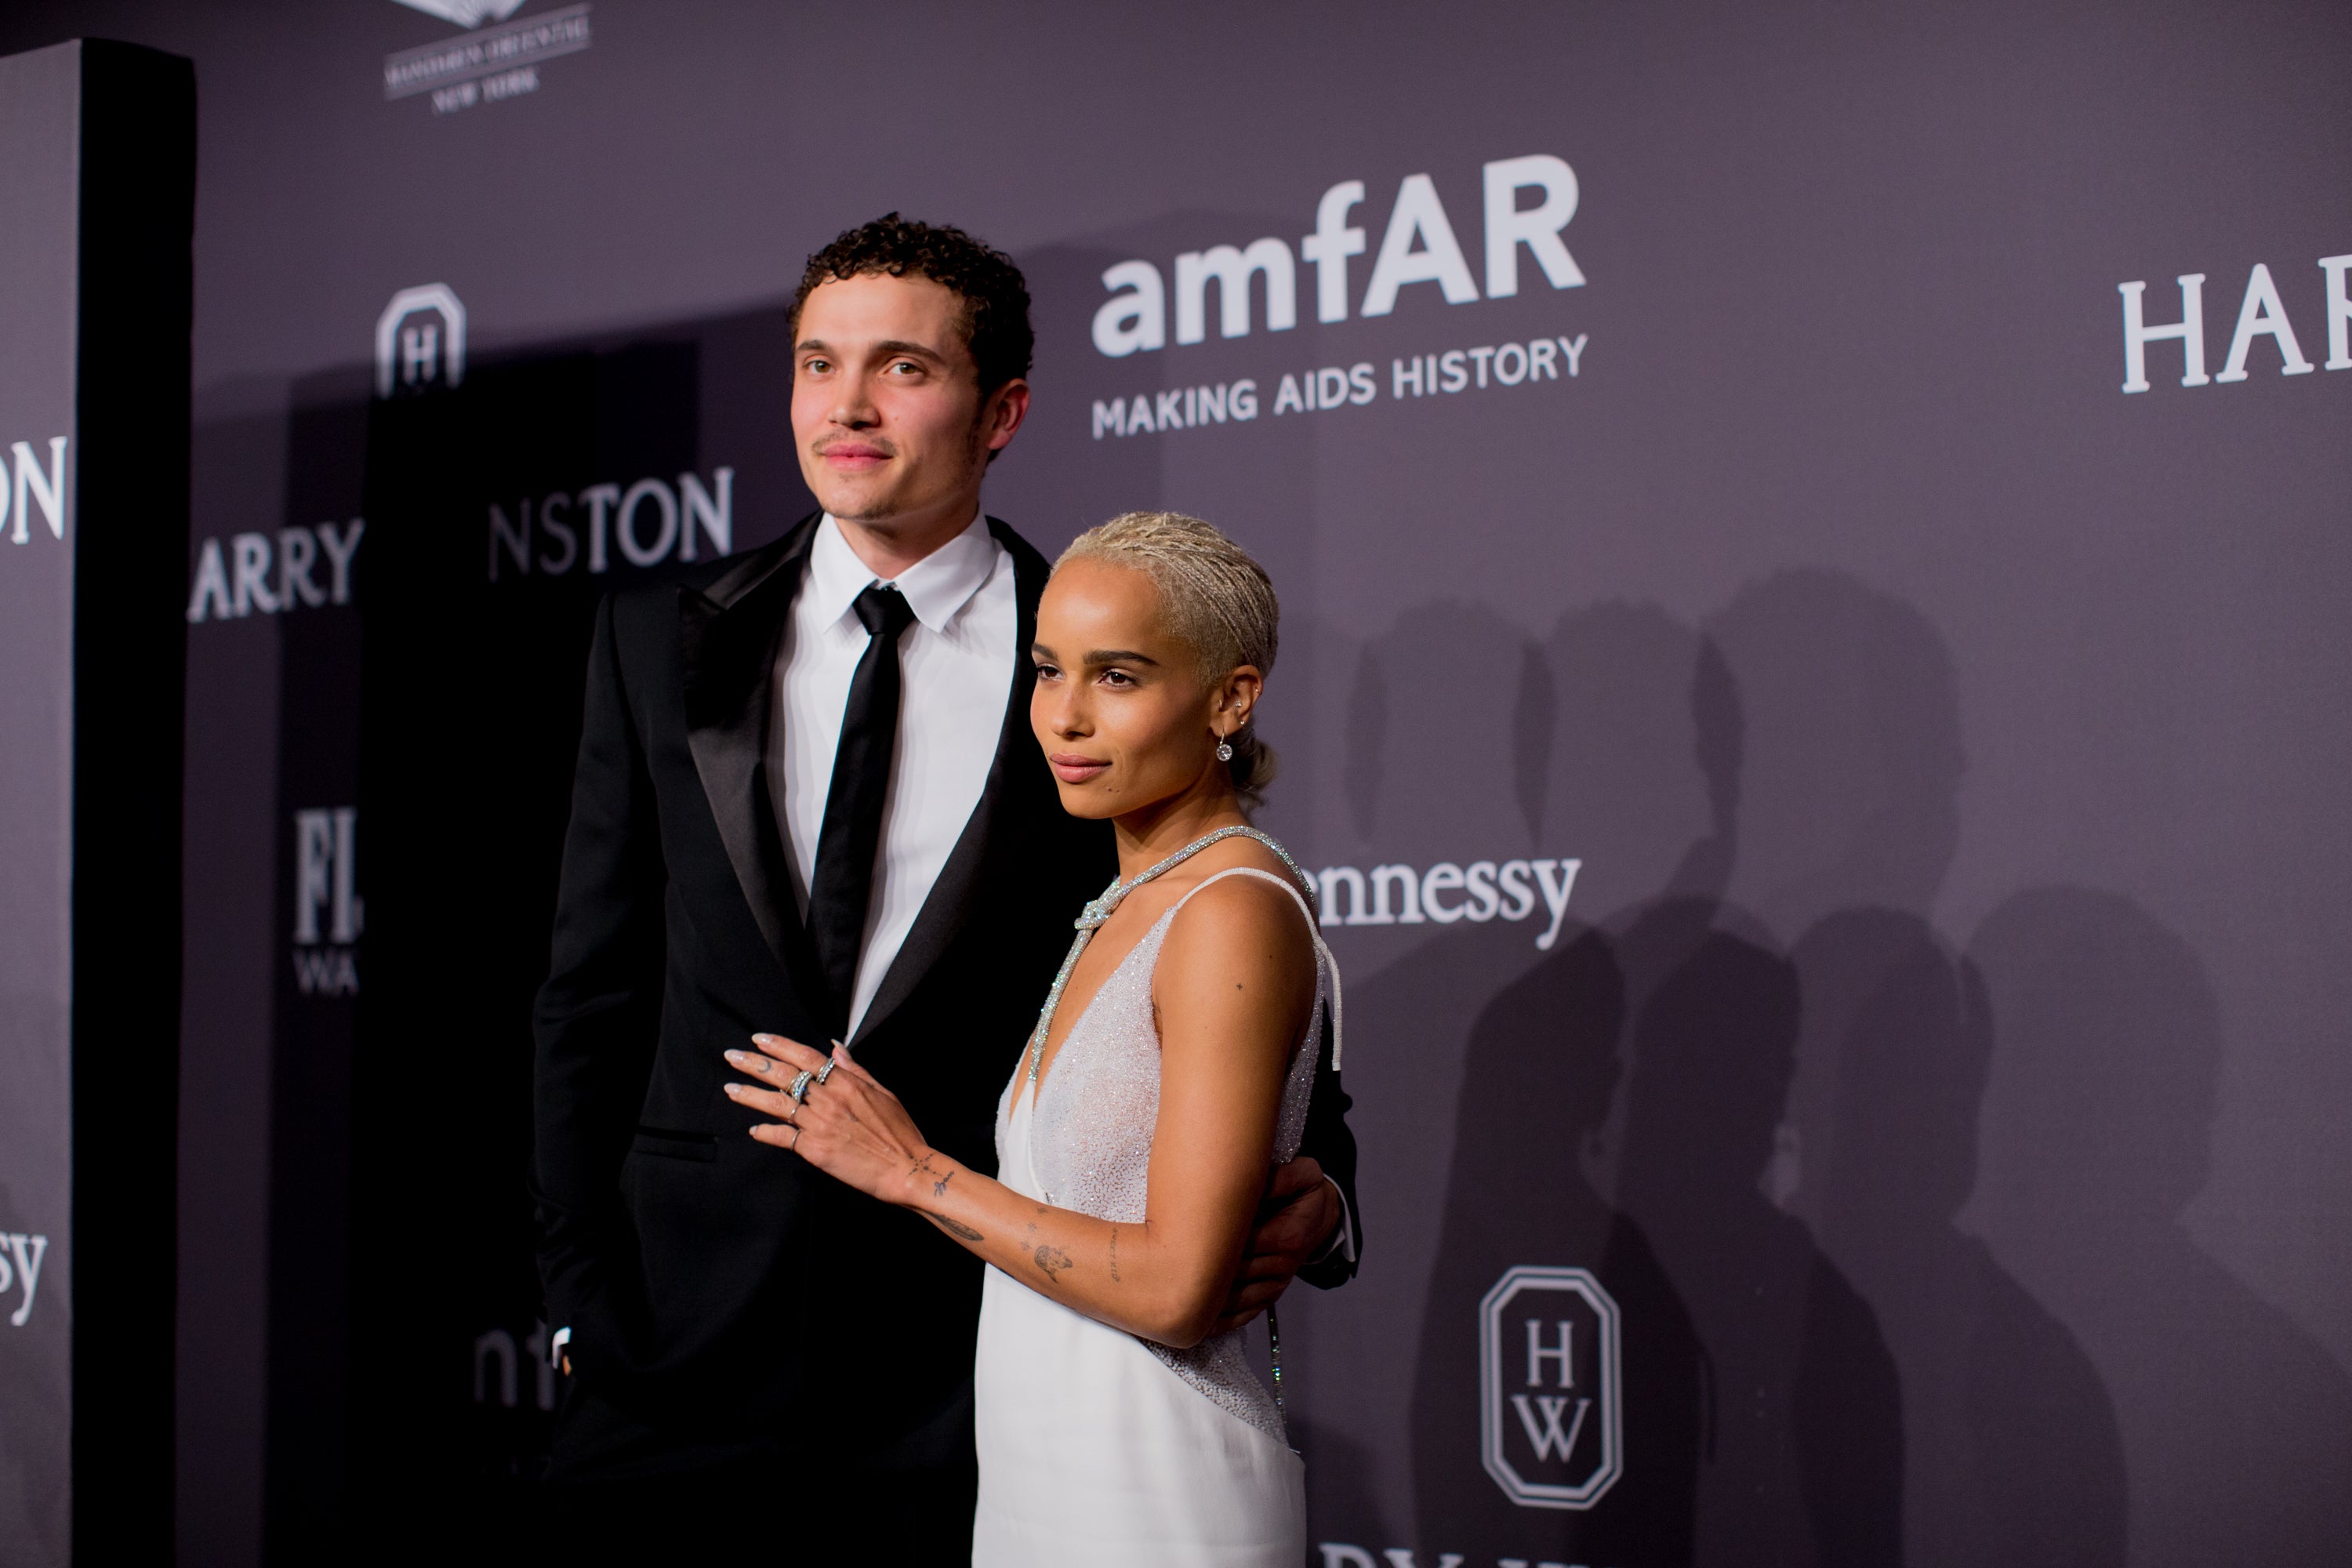 Zoë Kravitz Is A Married Woman! Here's What We Know About Her Husband Karl Glusman